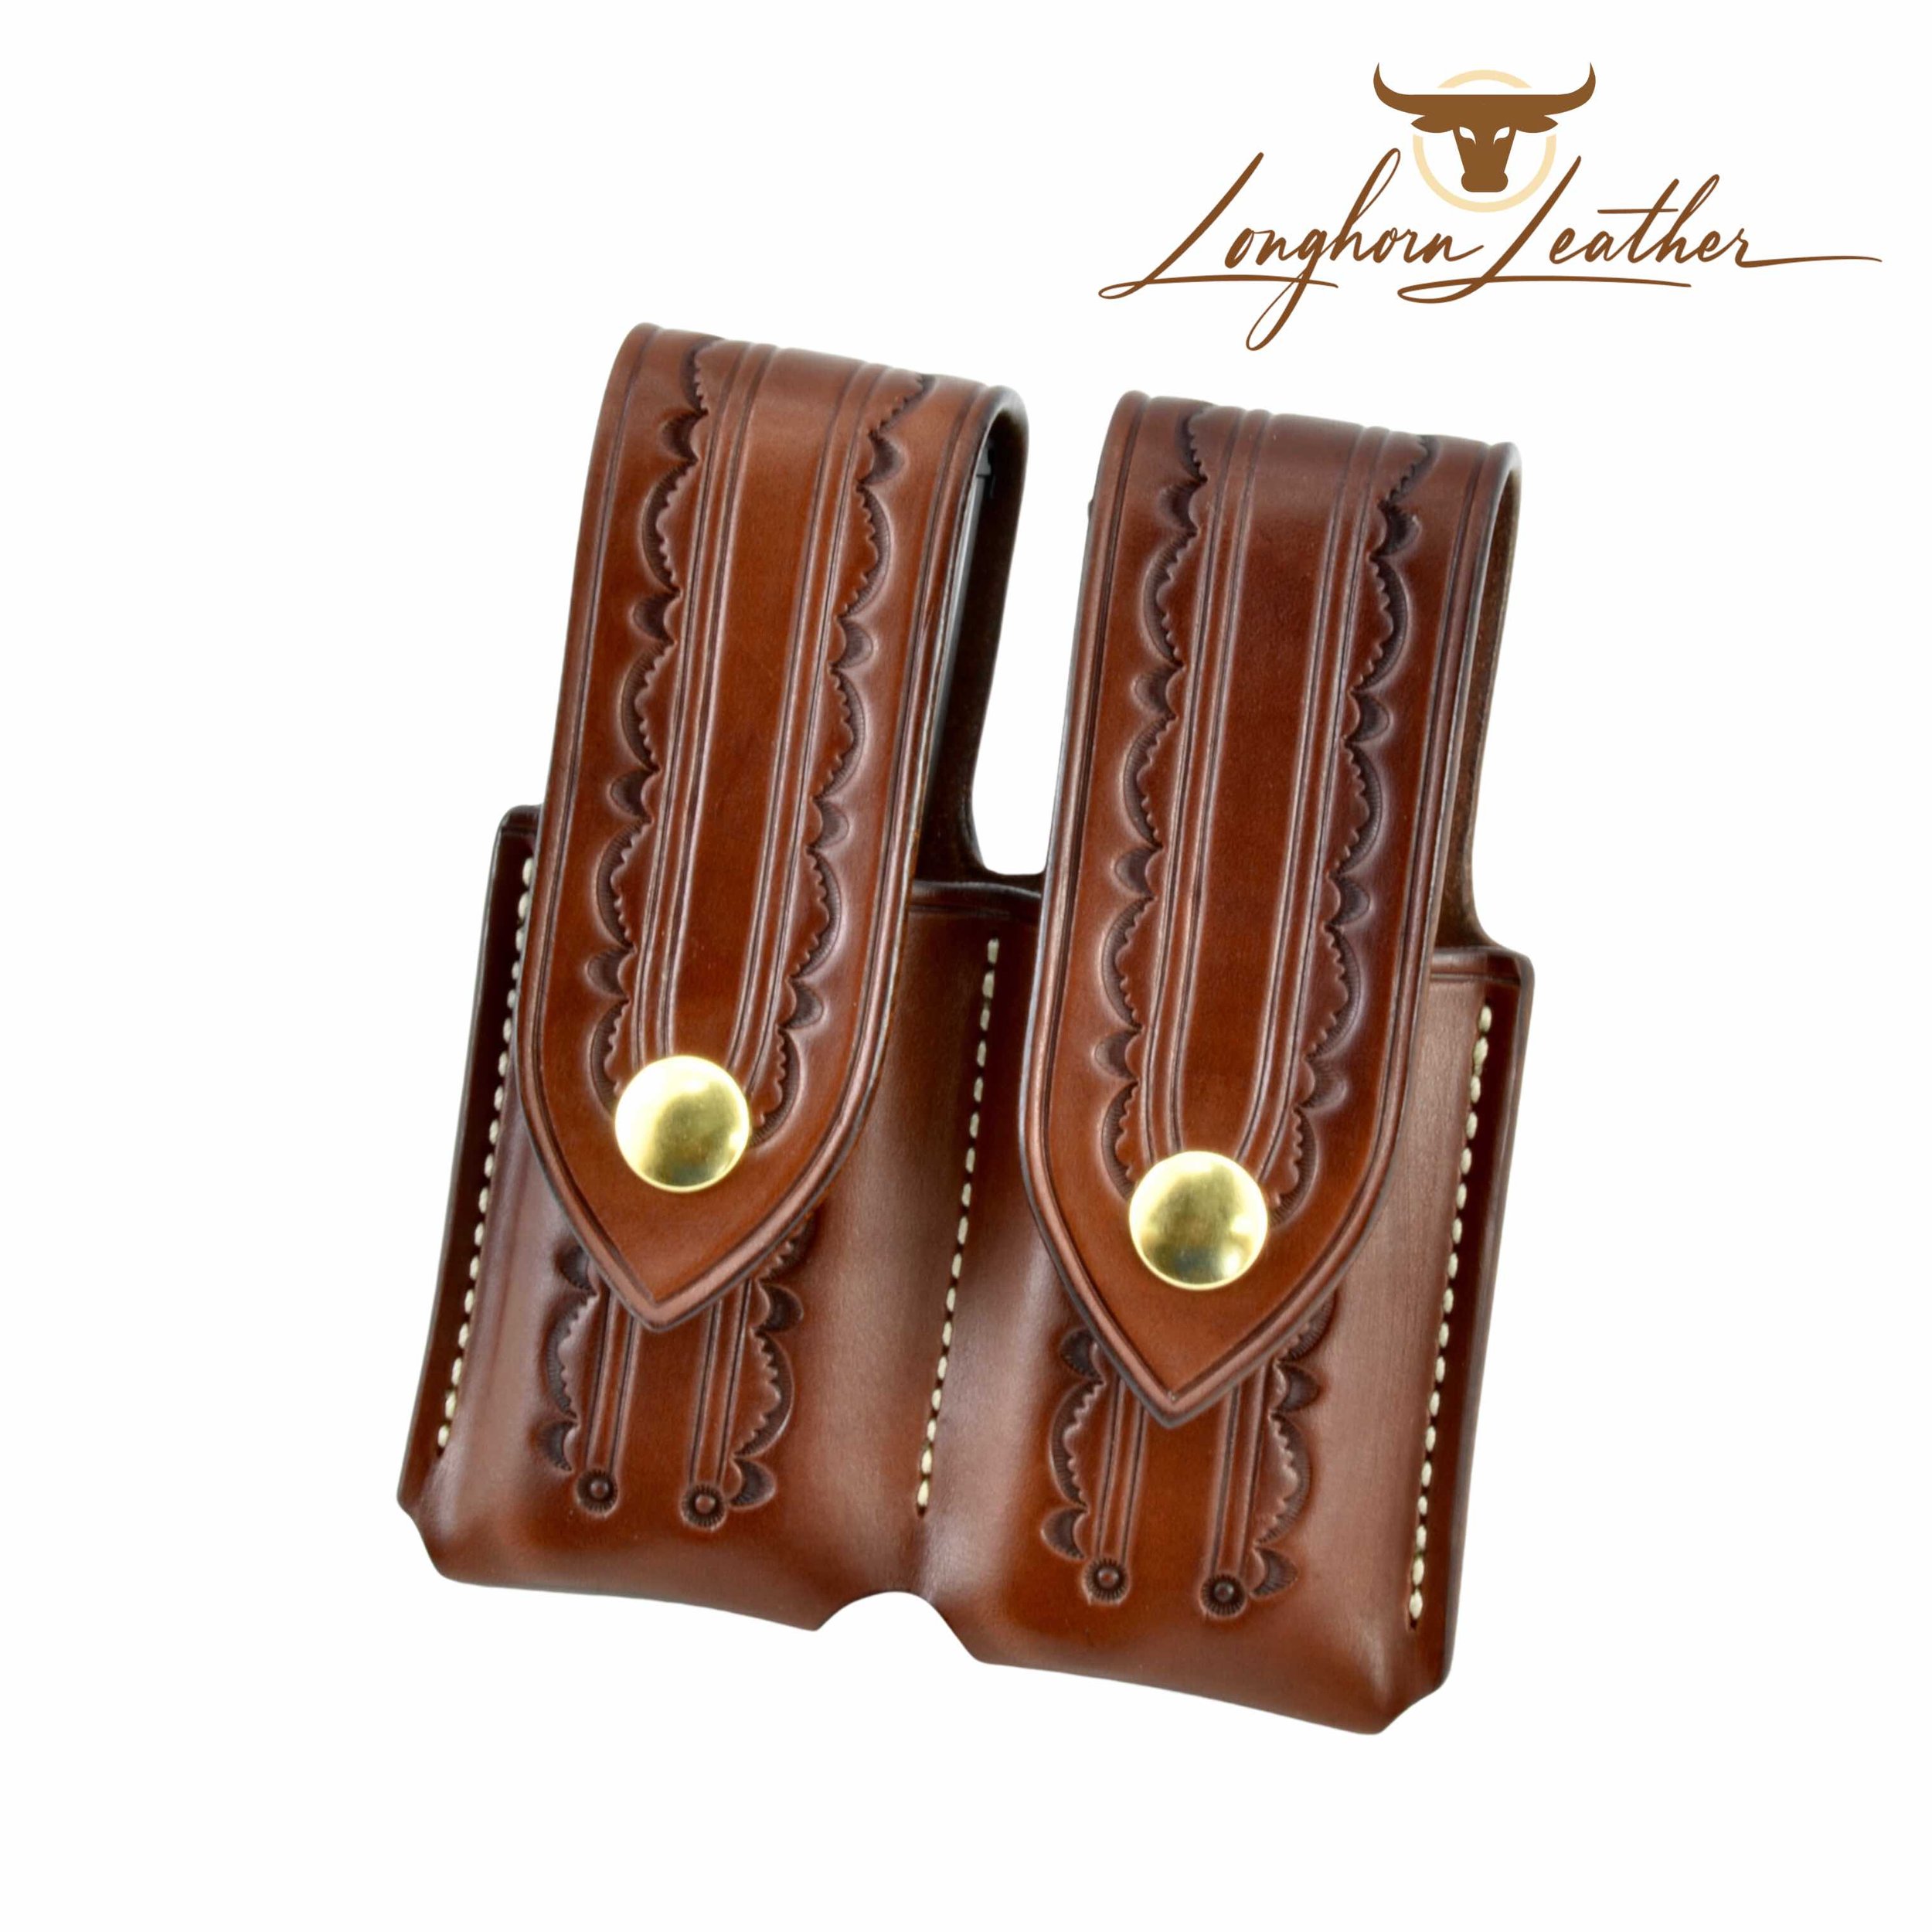 Custom Leather 1911 double magazine carrier featuring the Hand of God design.  Individually handcrafted at Longhorn Leather AZ